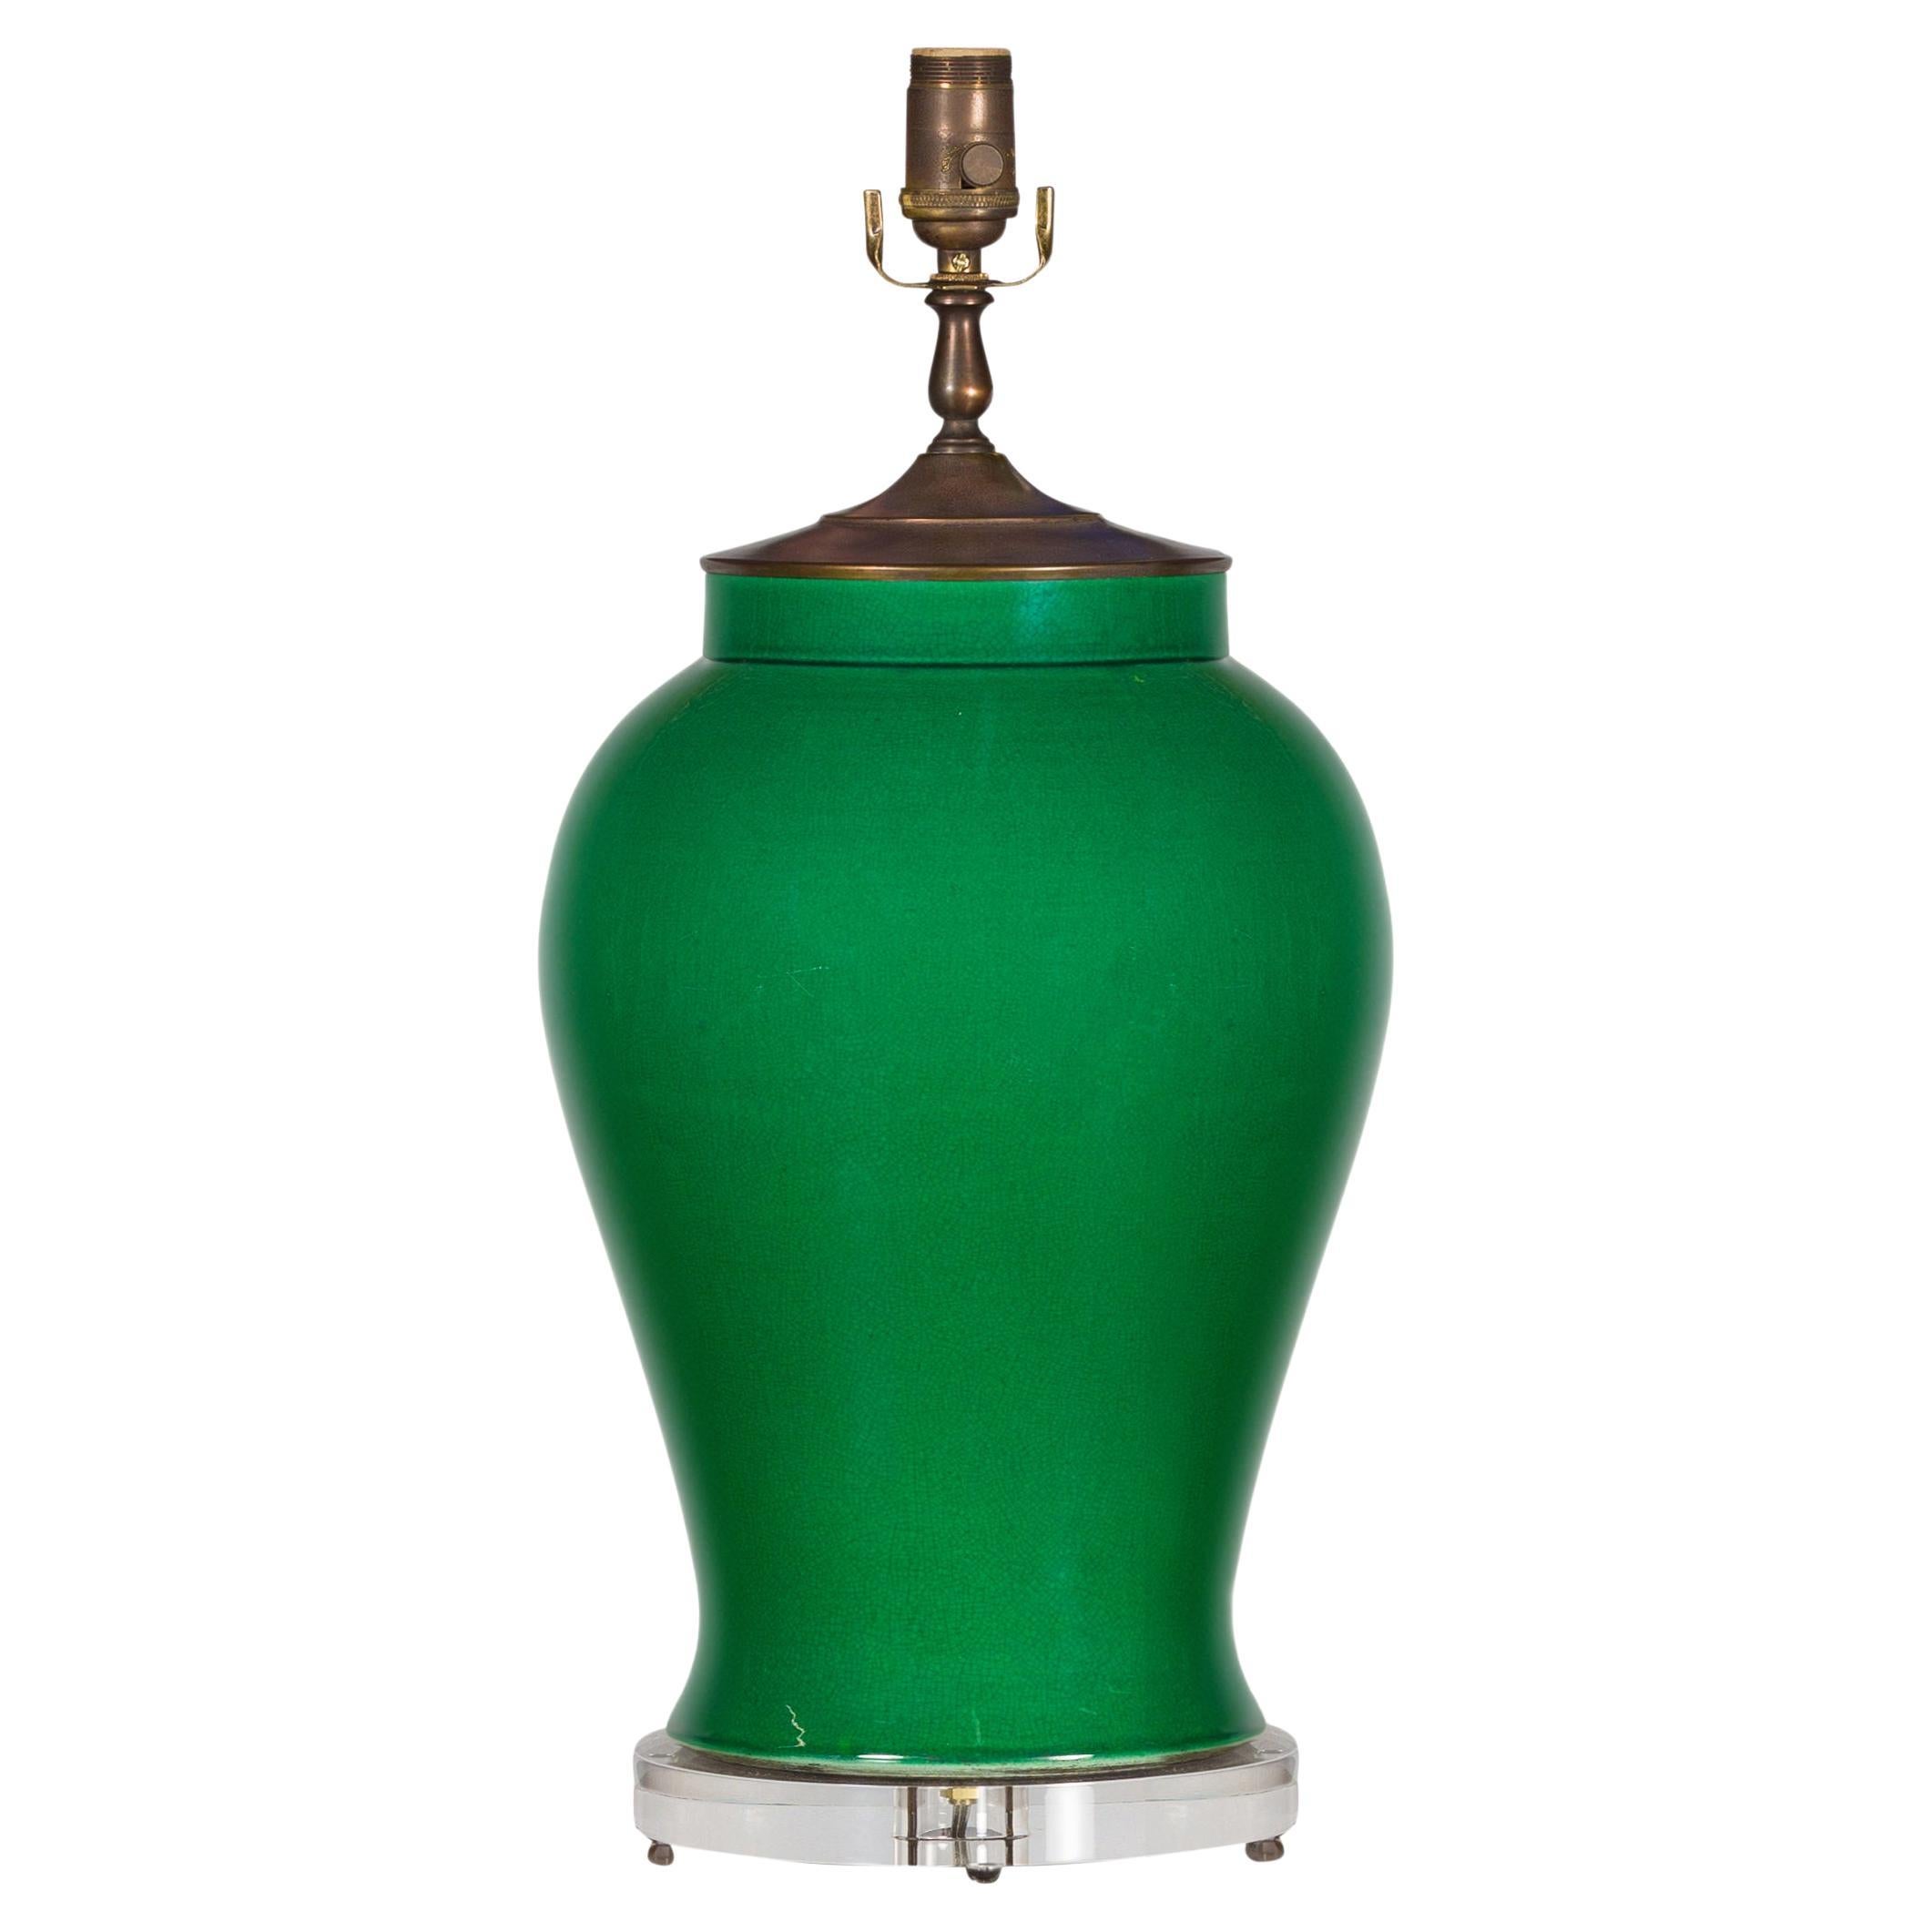 Green Porcelain Table Lamp with Discreet Crackle Finish on Lucite Base